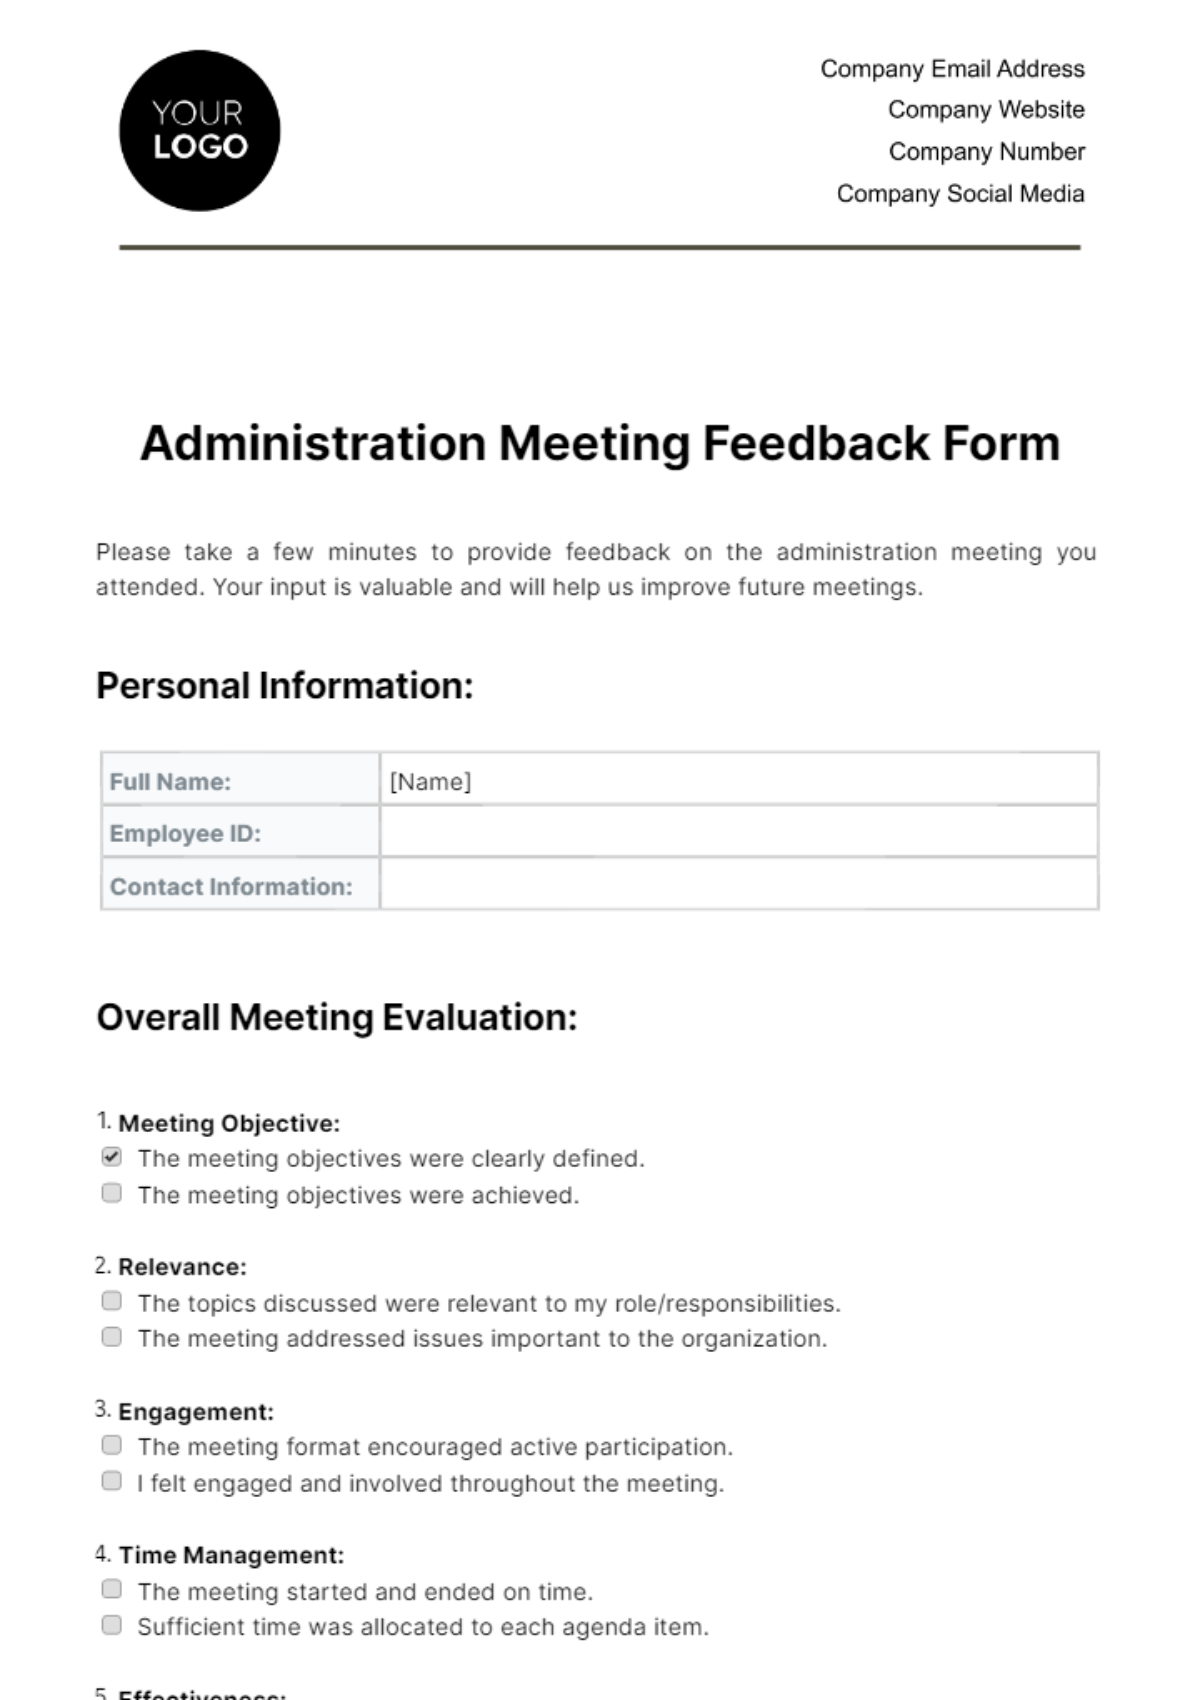 Free Administration Meeting Feedback Form Template